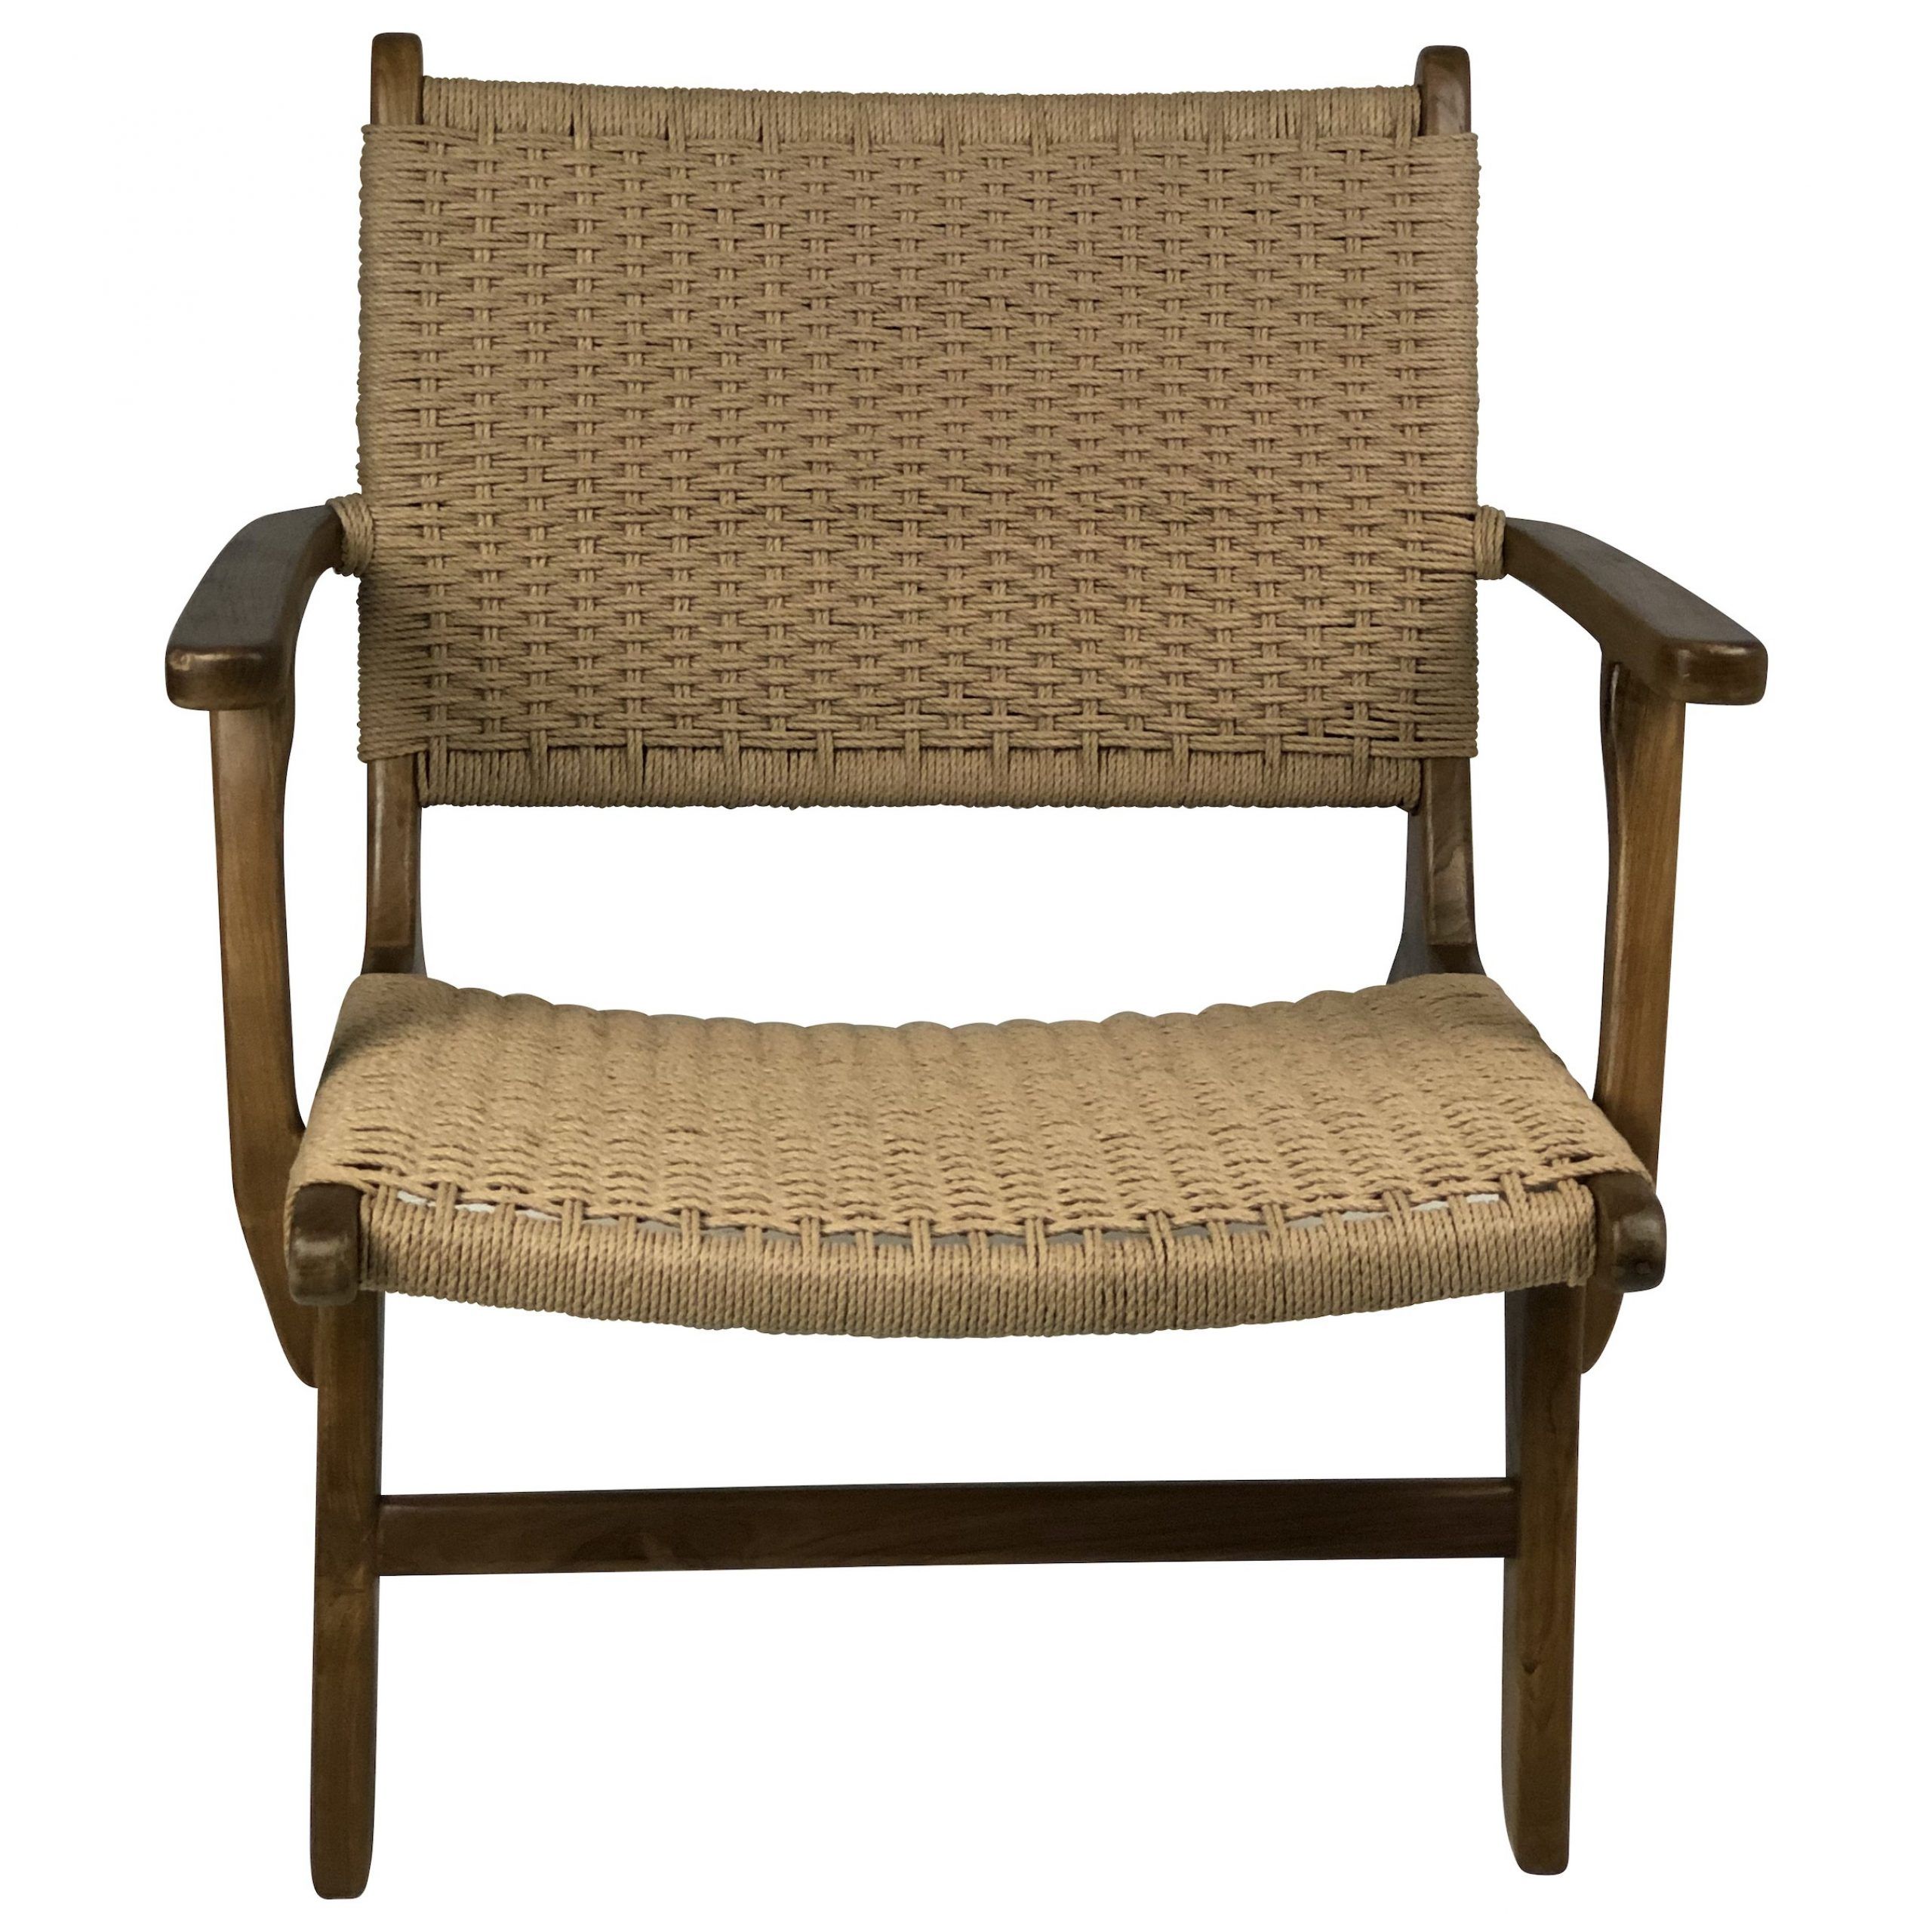 Millie Outdoor Teak And Rope Lounge Chair Regarding Metropolitan Outdoor Dining Chair Sets (View 3 of 15)